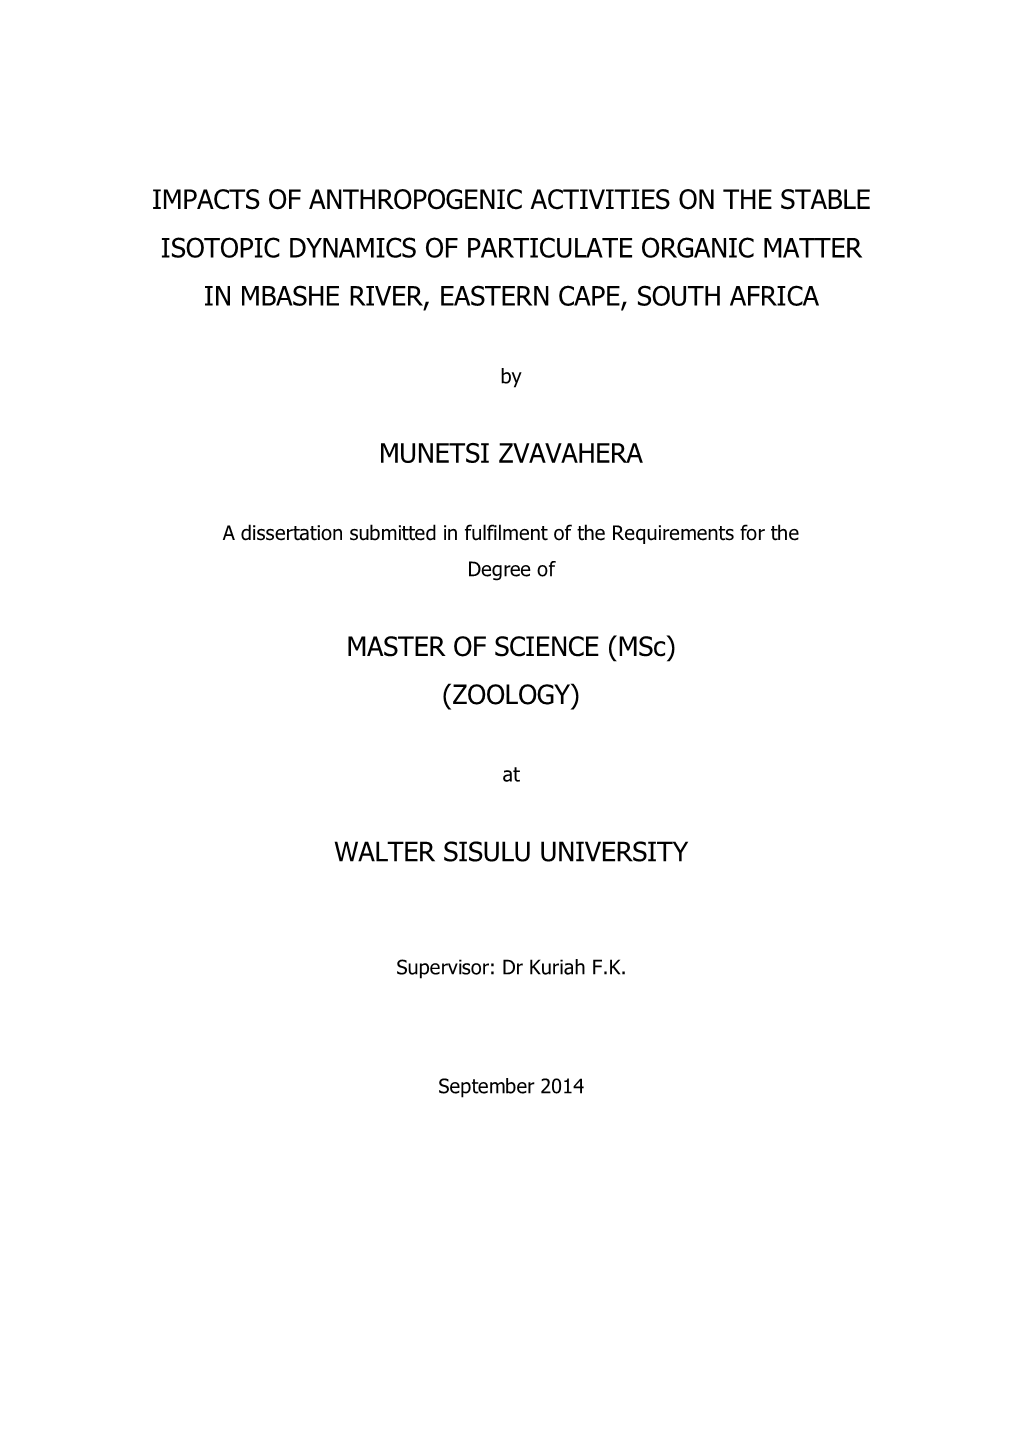 Impacts of Anthropogenic Activities on the Stable Isotopic Dynamics of Particulate Organic Matter in Mbashe River, Eastern Cape, South Africa